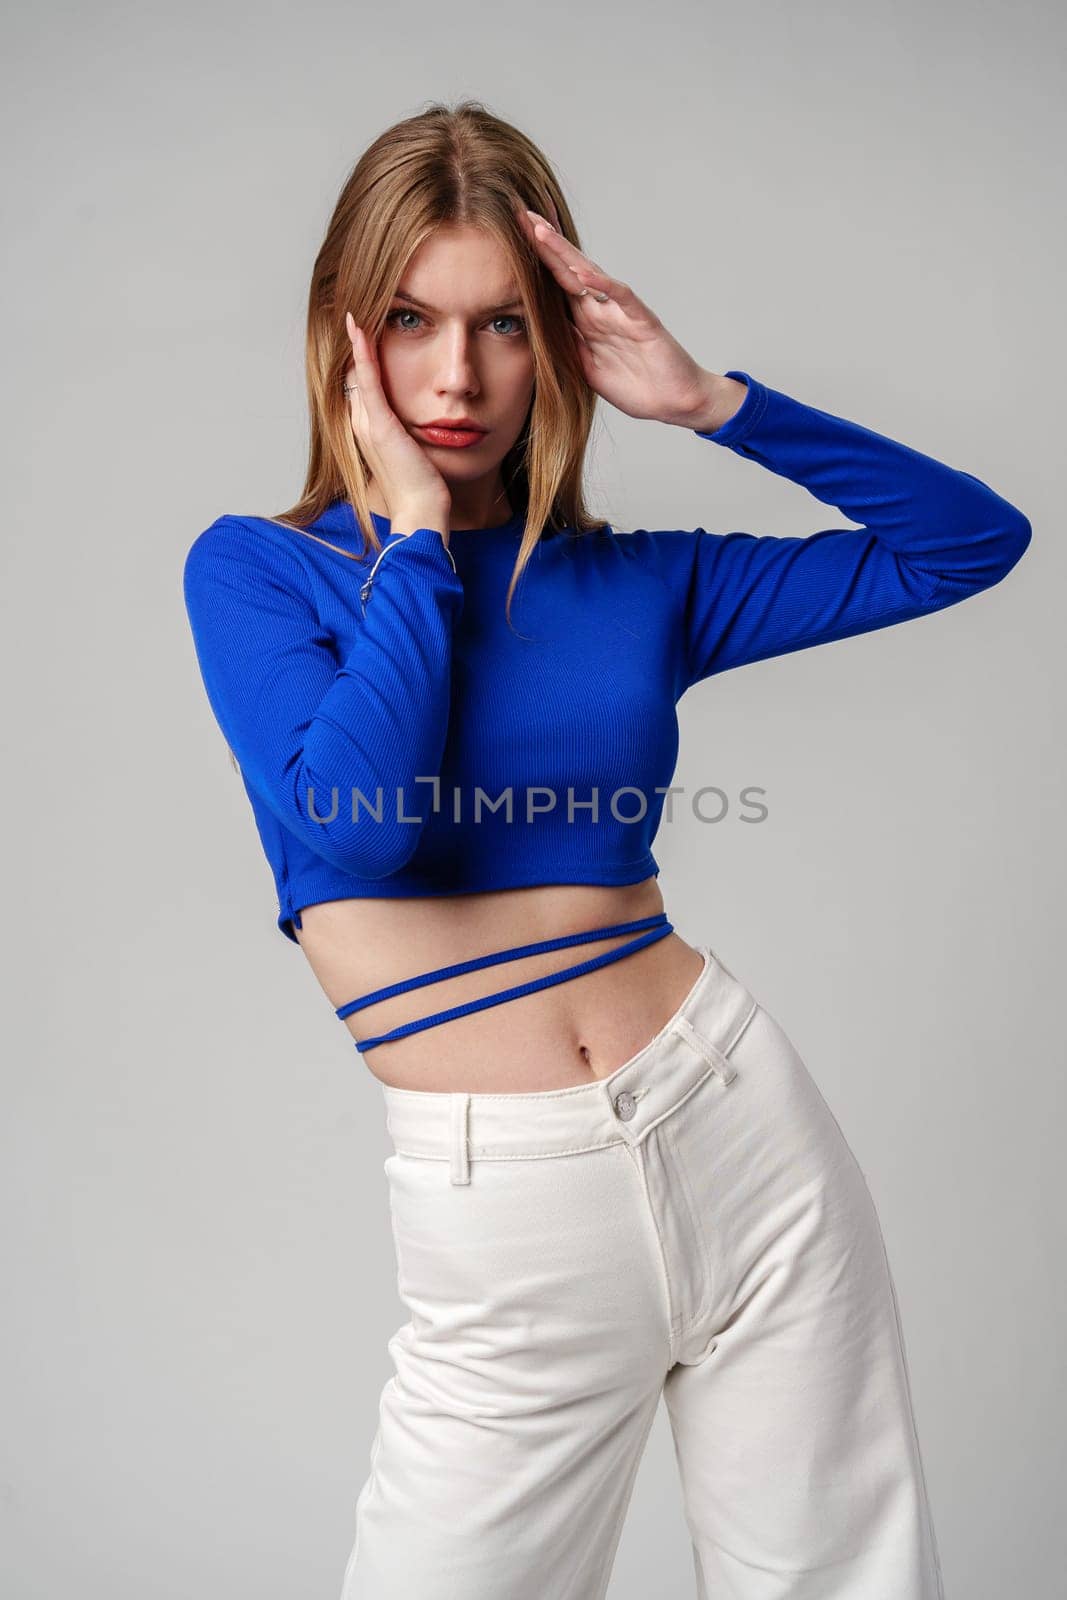 Young Woman model in Blue Top and White Pants posing on white background by Fabrikasimf